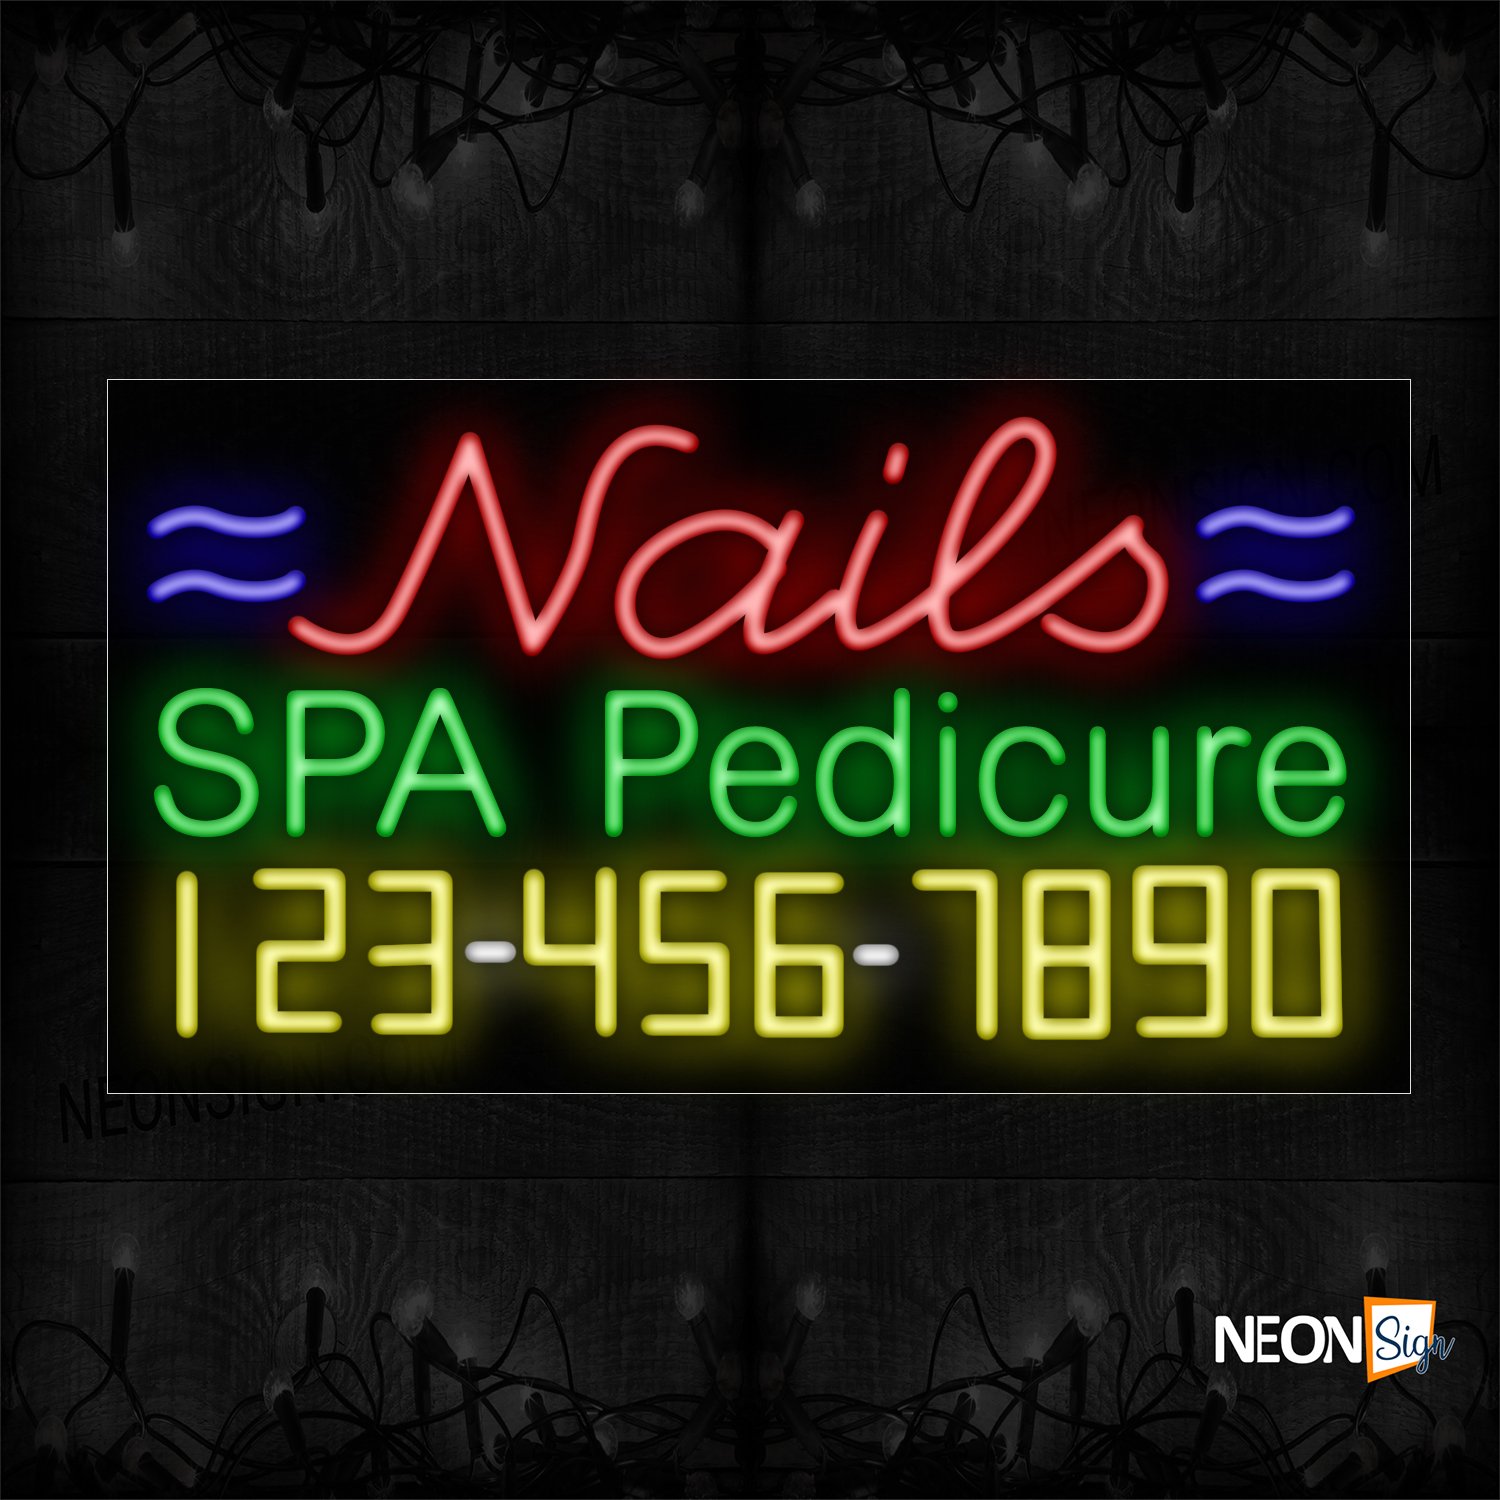 Image of Nail Spa Pedicure With Telephone Number Neon Sign